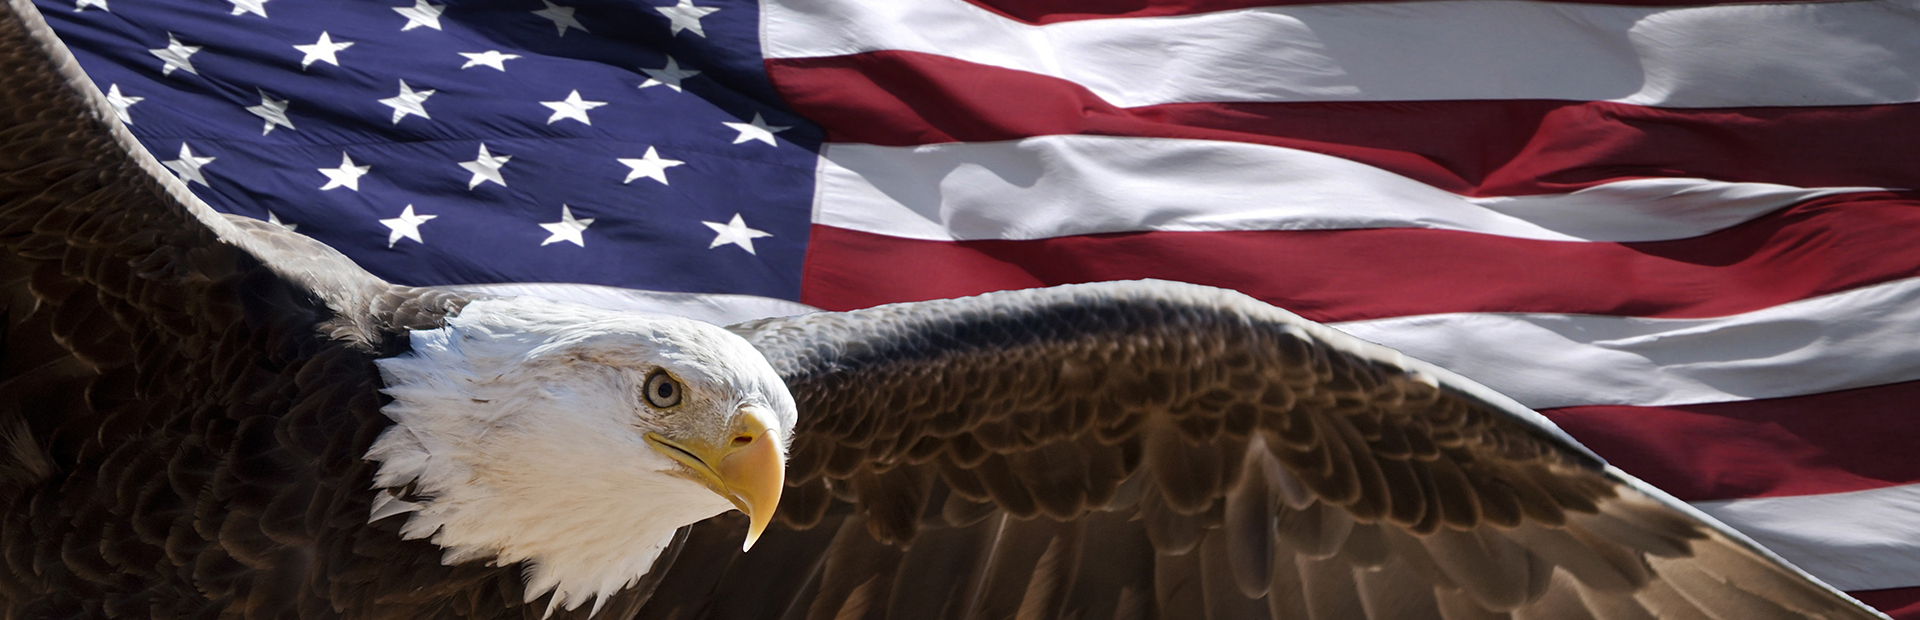 Bald eagle in front of the American flag